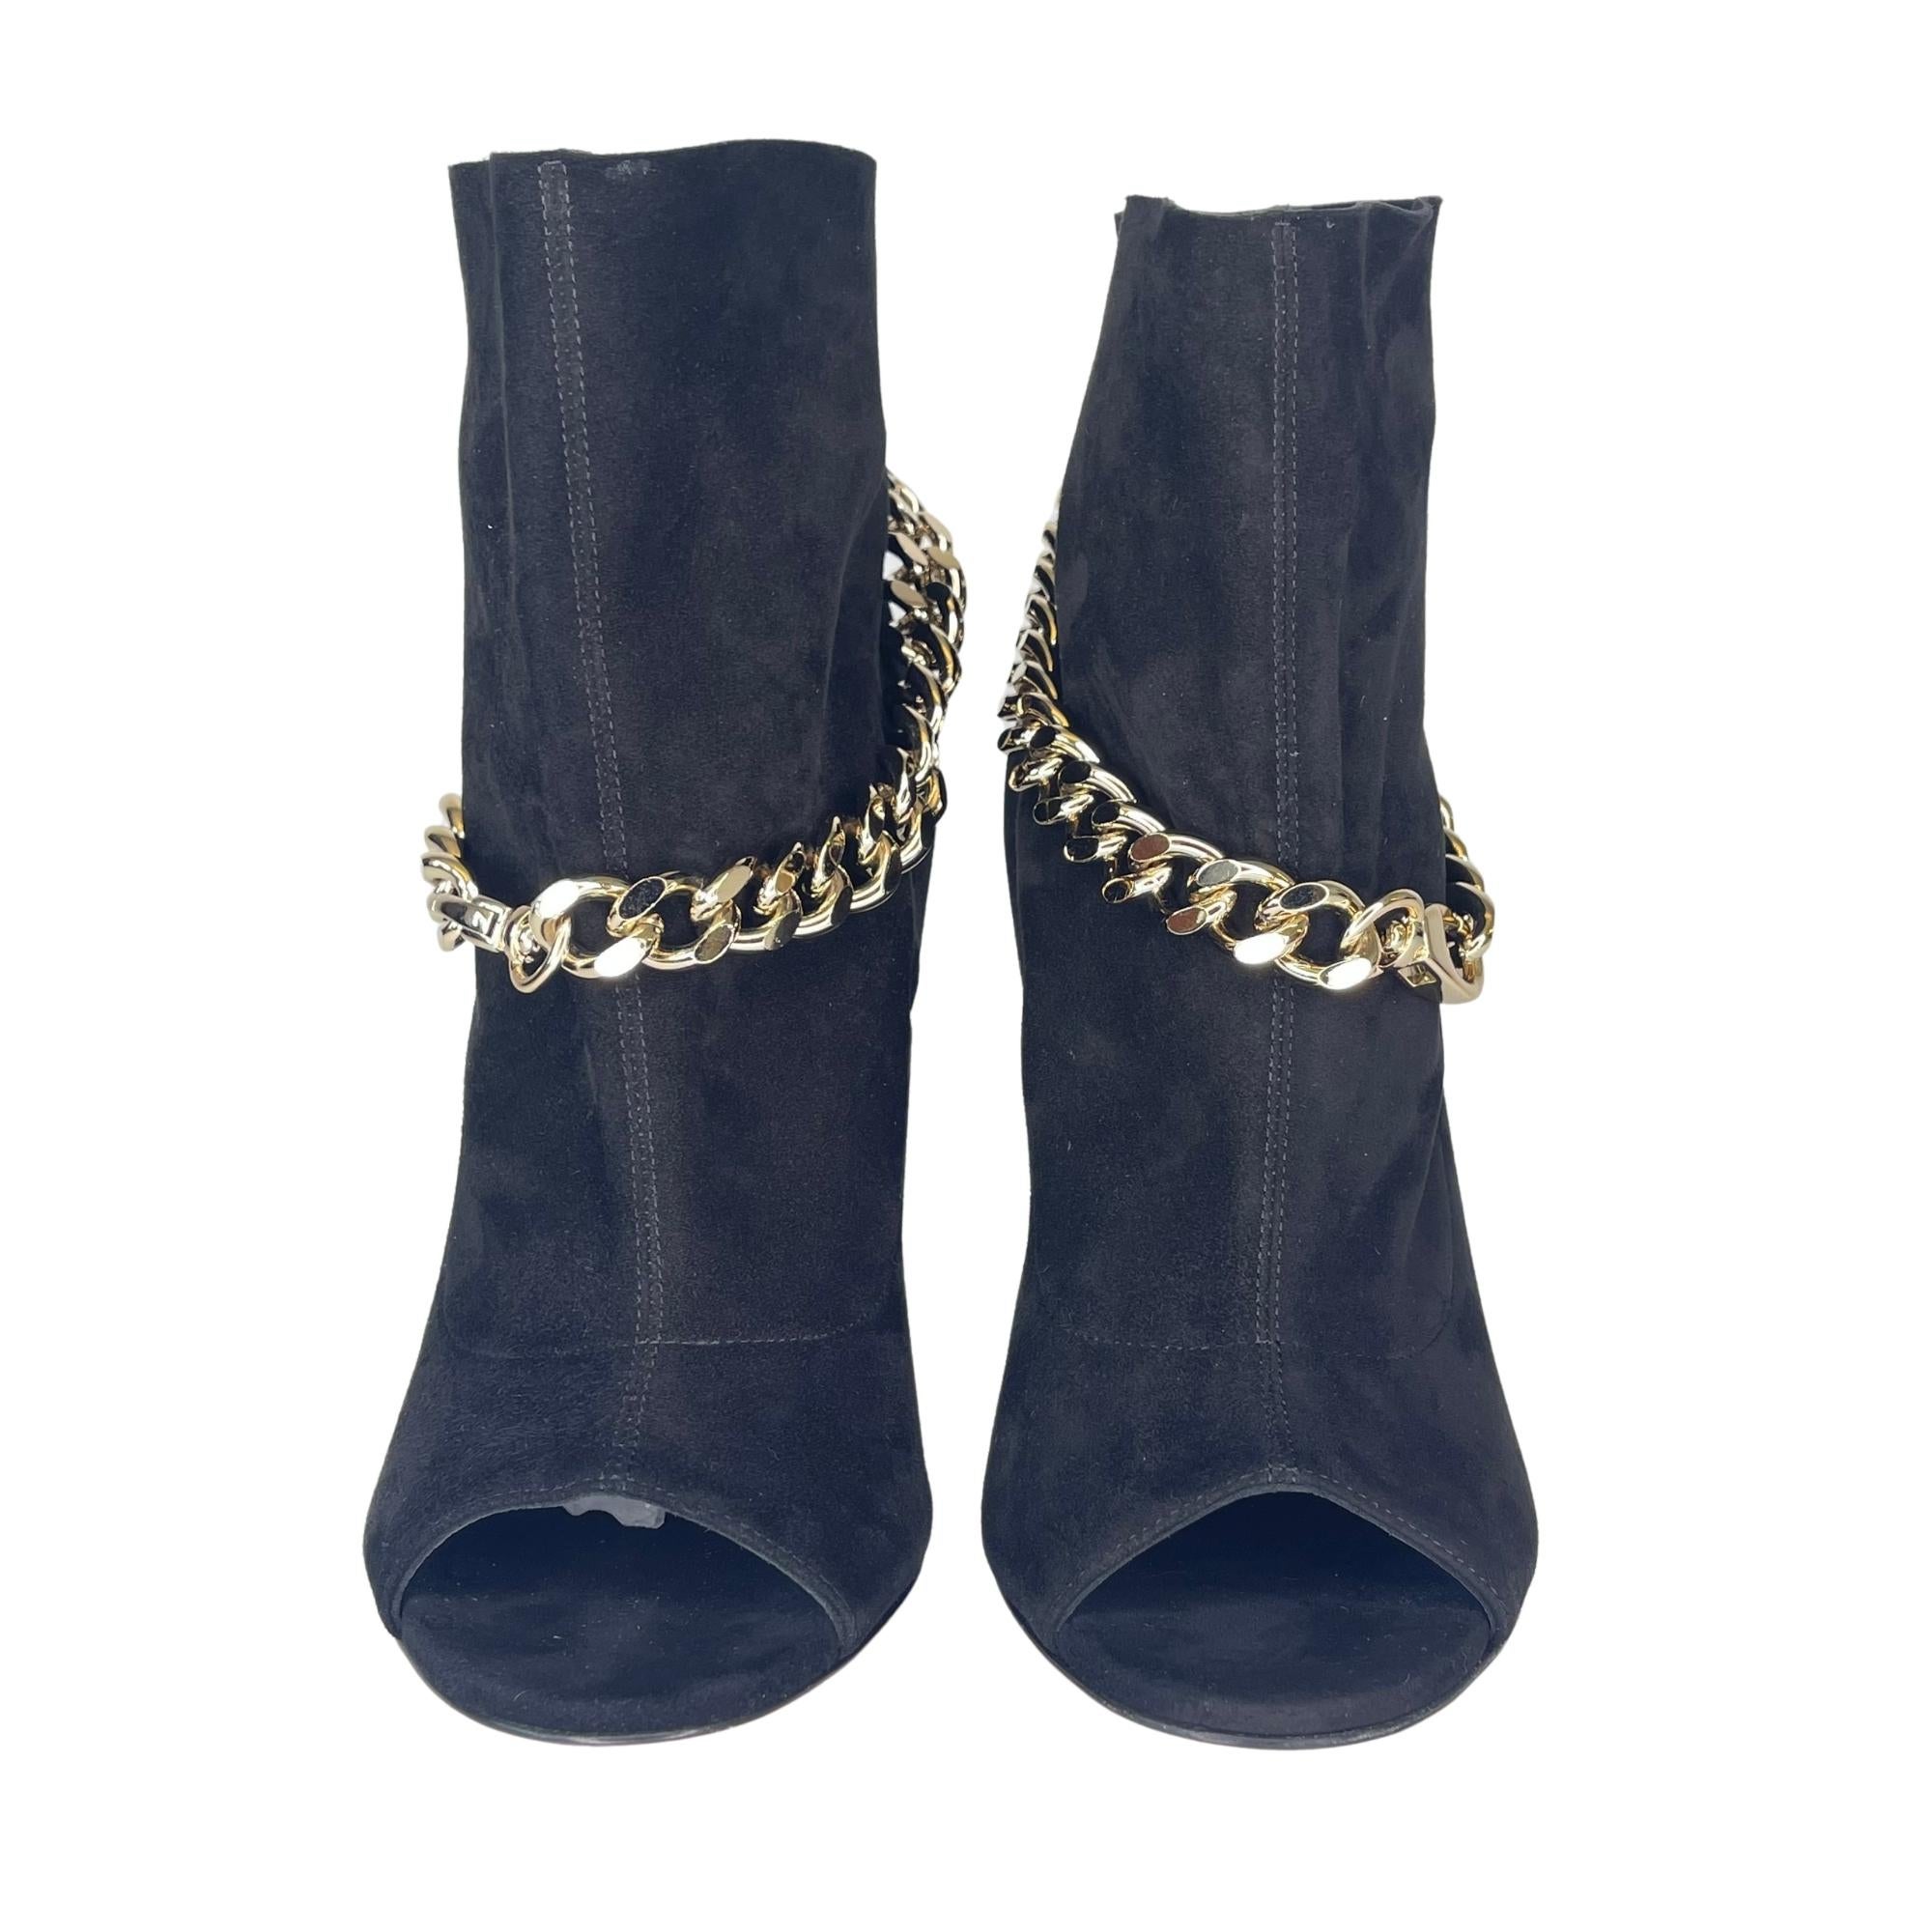 Black suede chain-embellished ankle boots from Casadei featuring an open toe, a slouchy design, a slip-on style, a high stiletto heel and a gold-tone chain embellishment.

COLOR: Black
MATERIAL: Suede
SIZE: 38 EU / 7 US
HEEL HEIGHT: 100 mm /